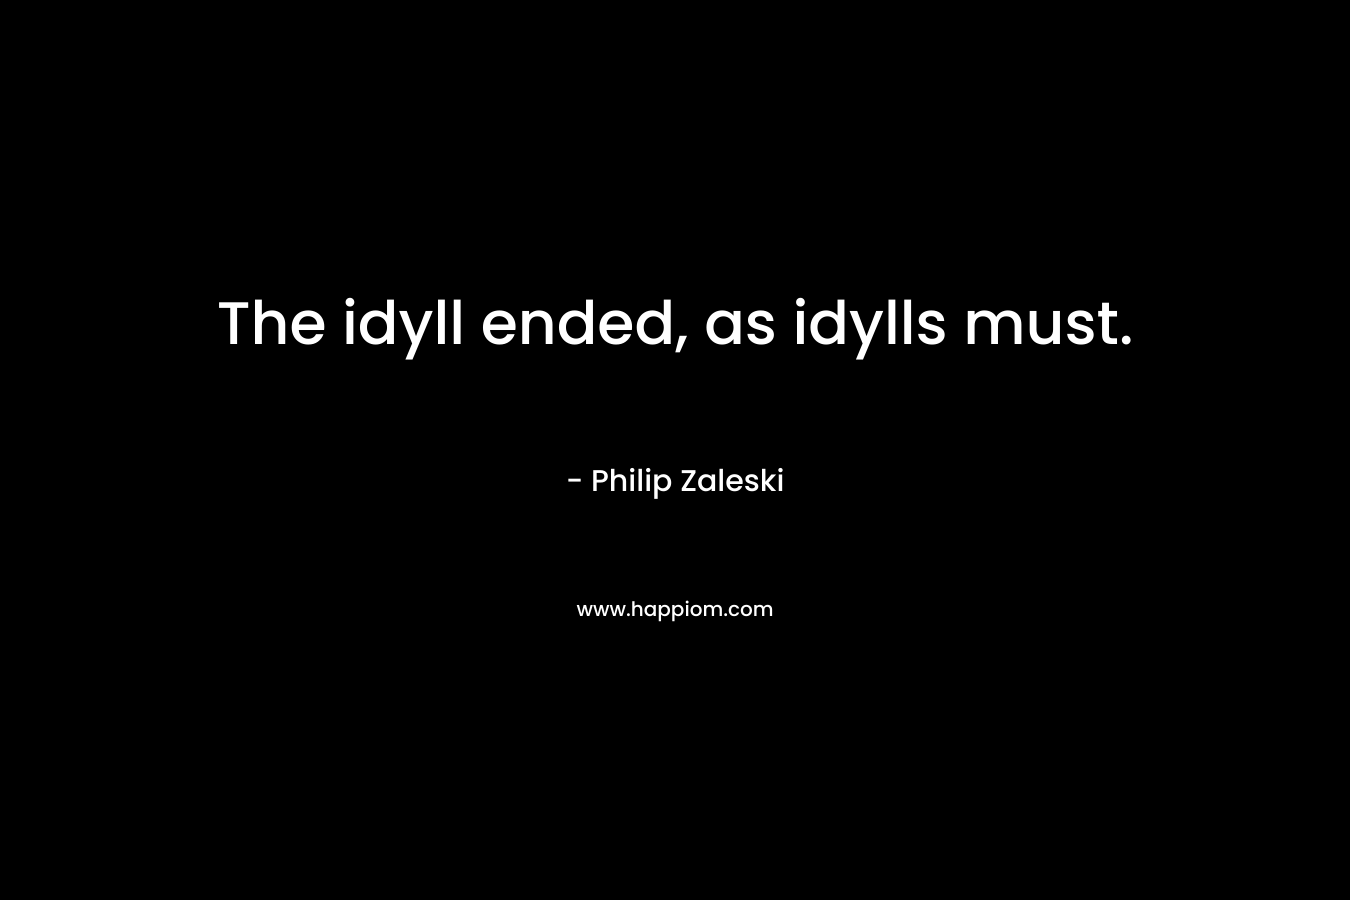 The idyll ended, as idylls must.